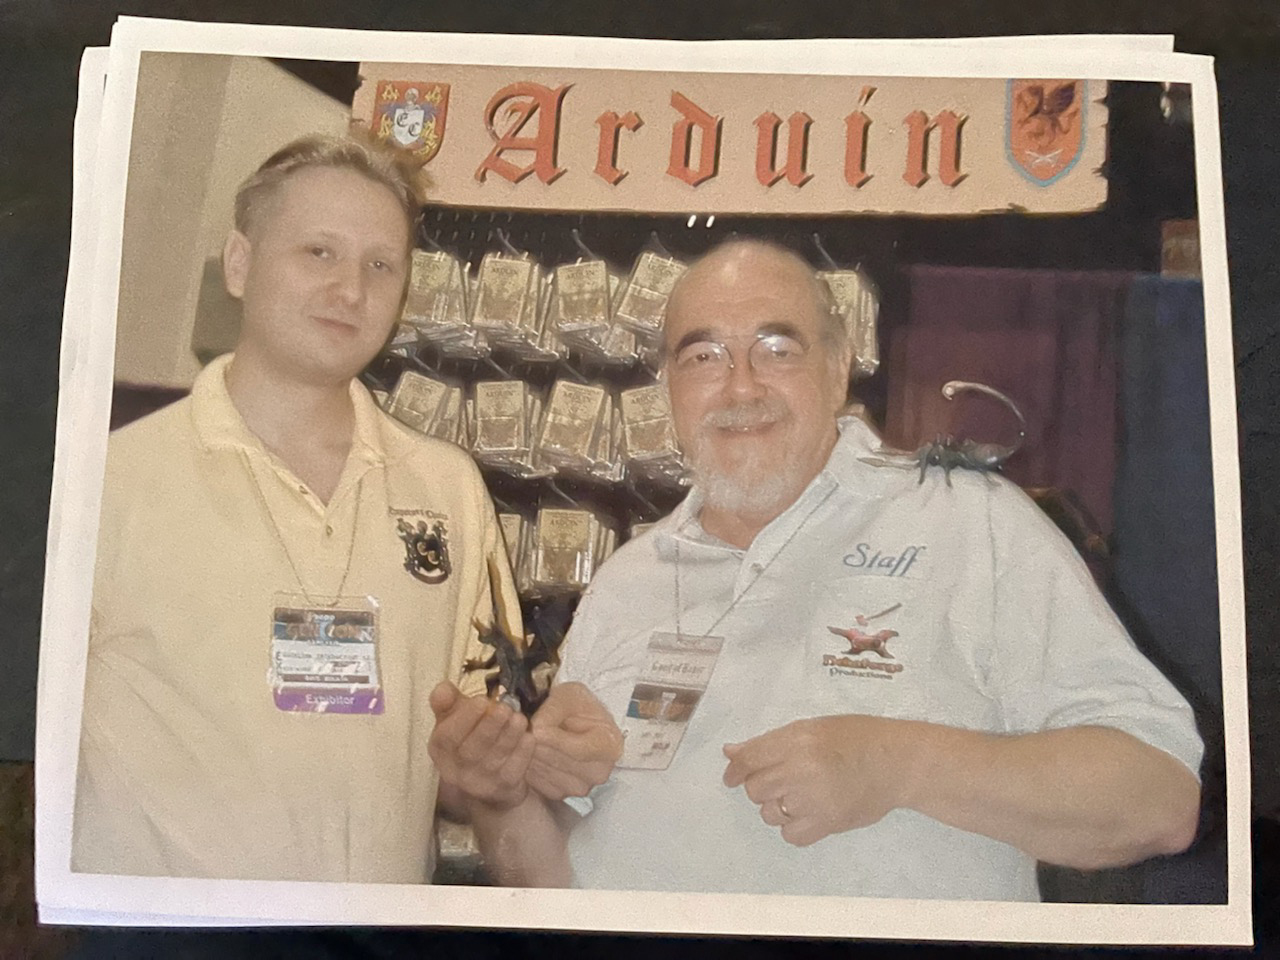 Dave Bukata and Gary Gygax with dragon and grey horror Gen Con